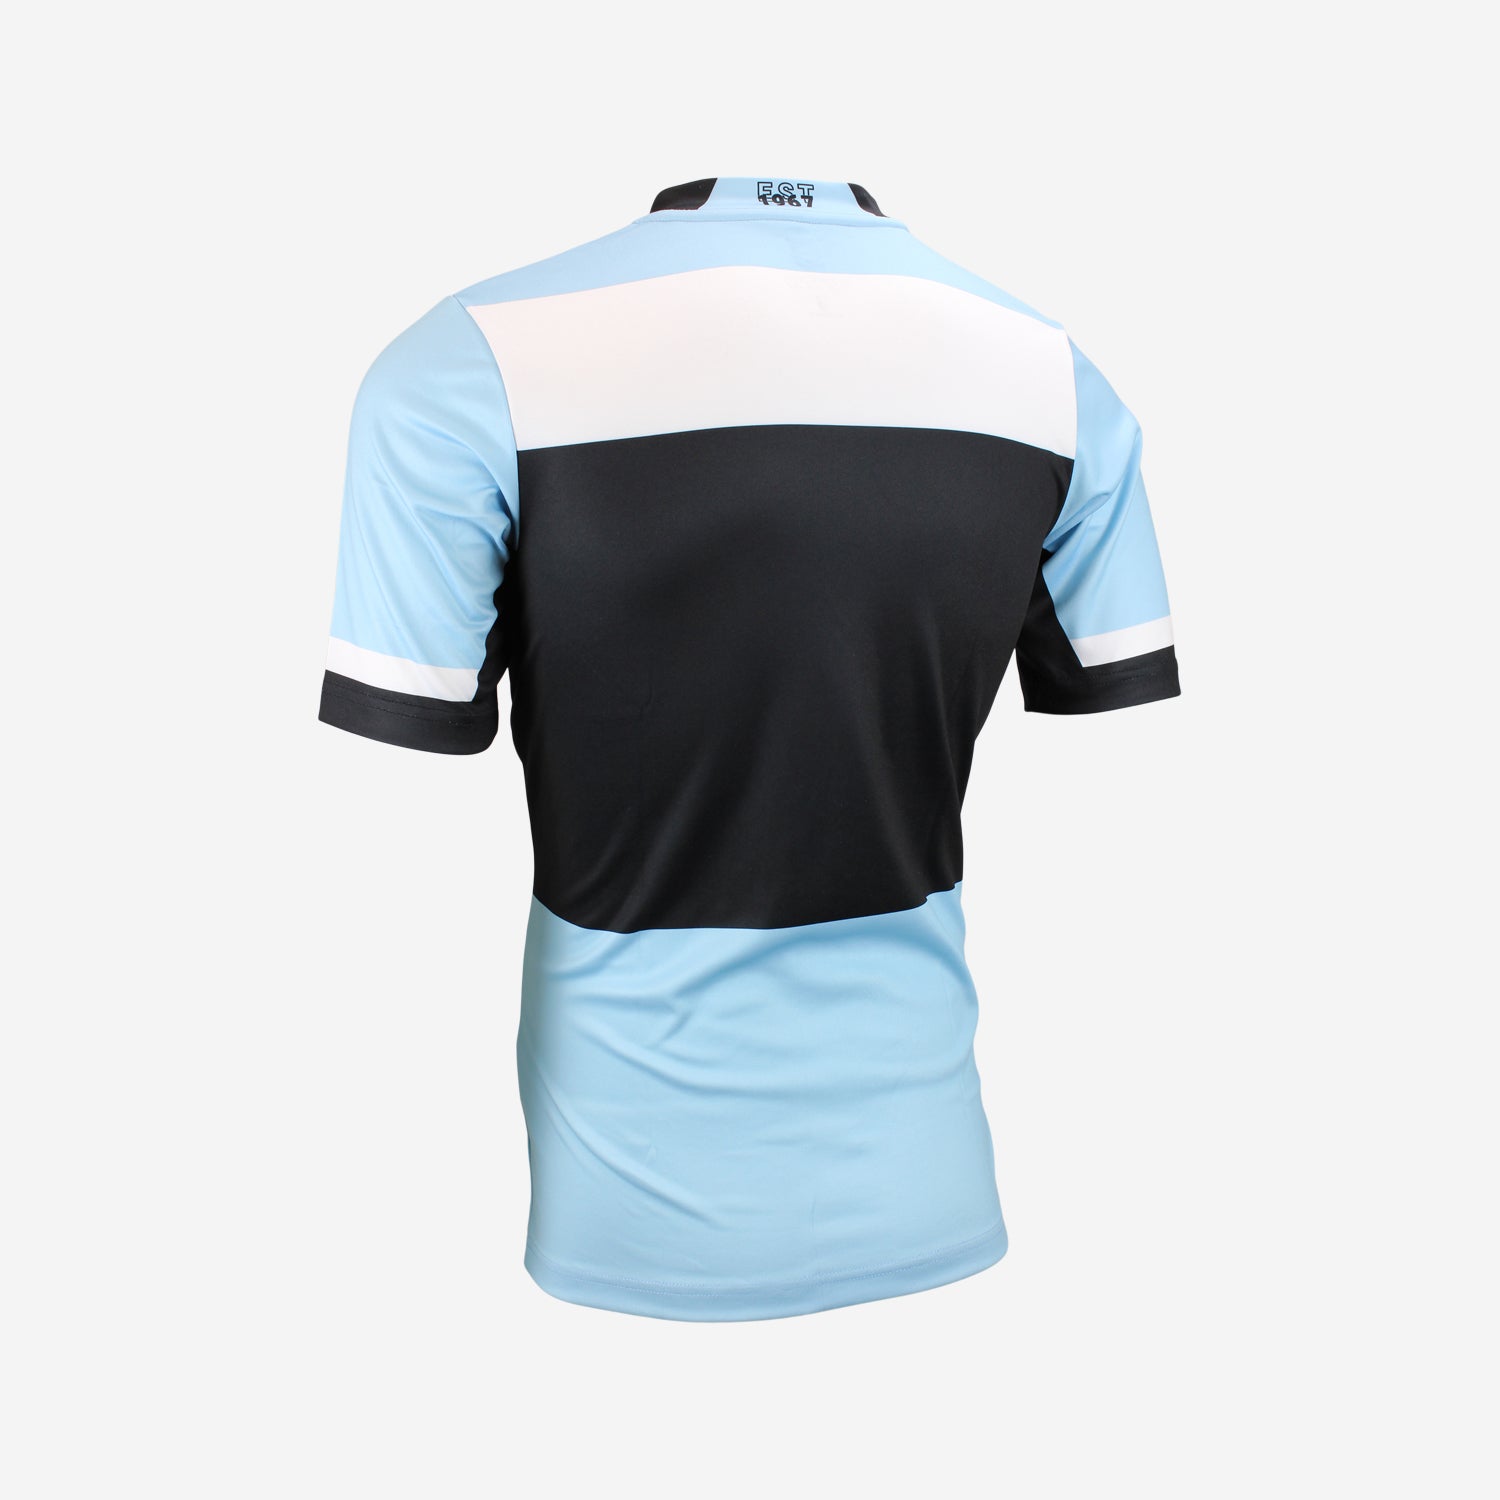 Classic Rugby Shirts | 1998 Cronulla Sharks Vintage Old NRL Jerseys